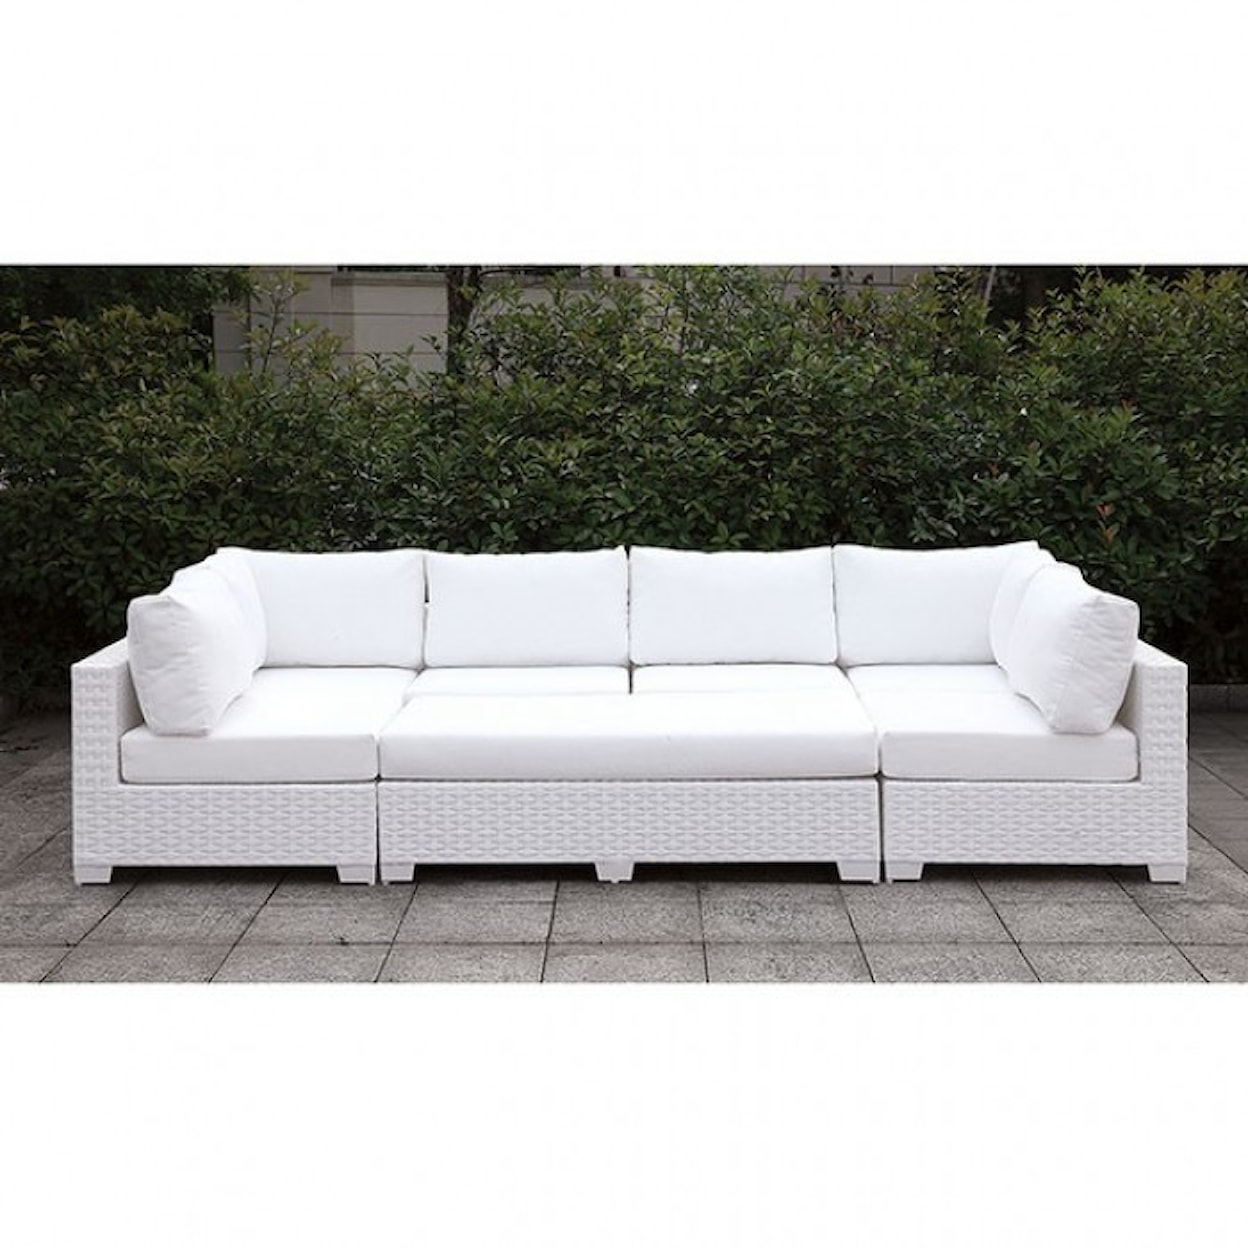 Furniture of America Somani Daybed